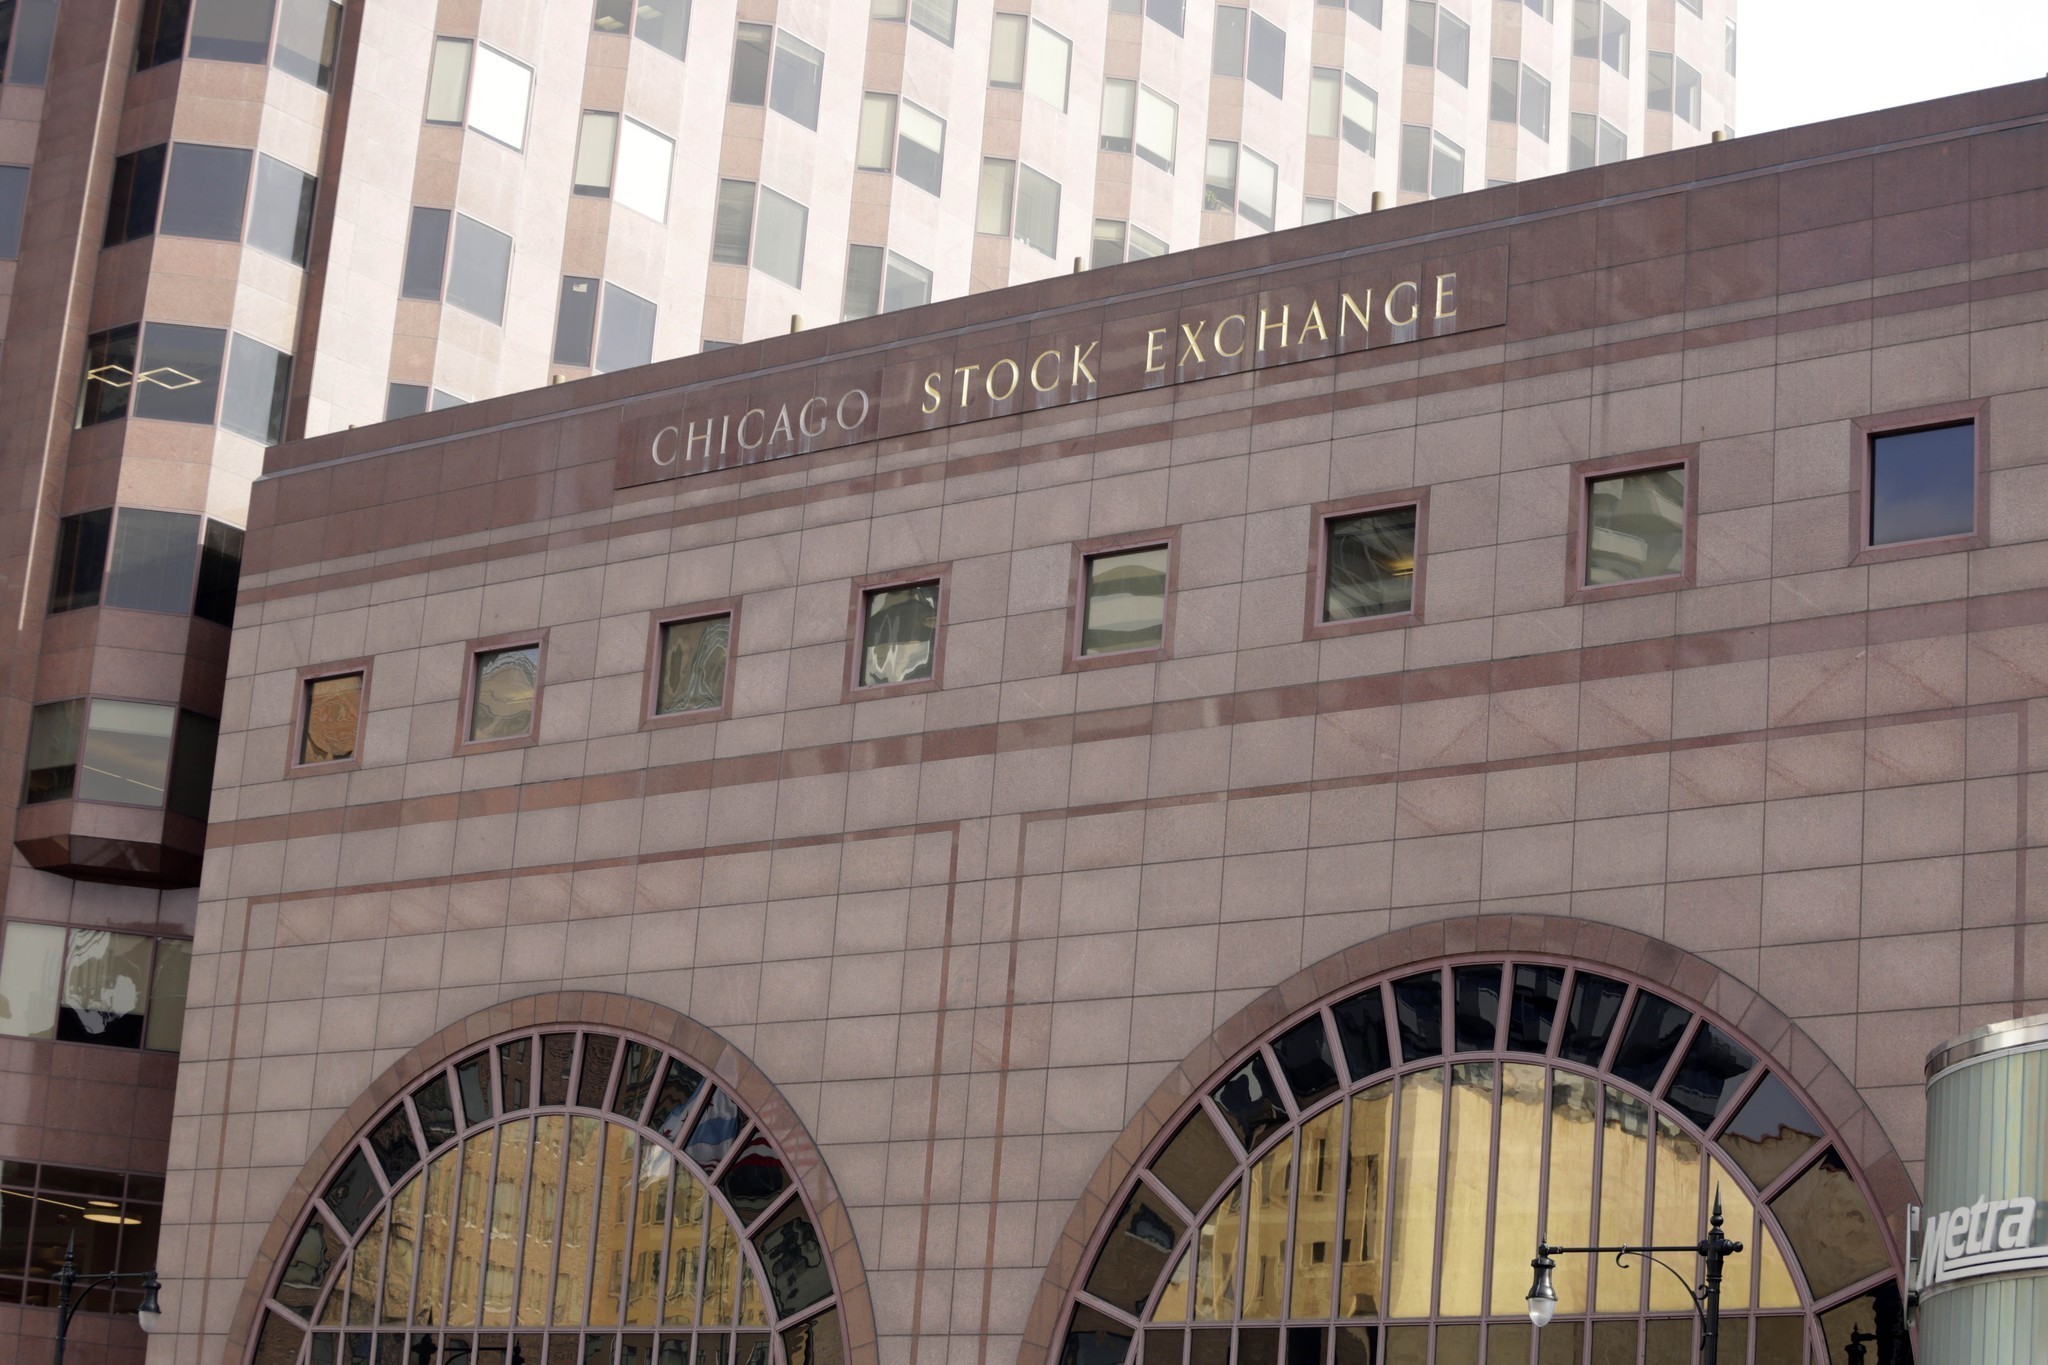 Chinese bid to buy Chicago Stock Exchange stirs security fears